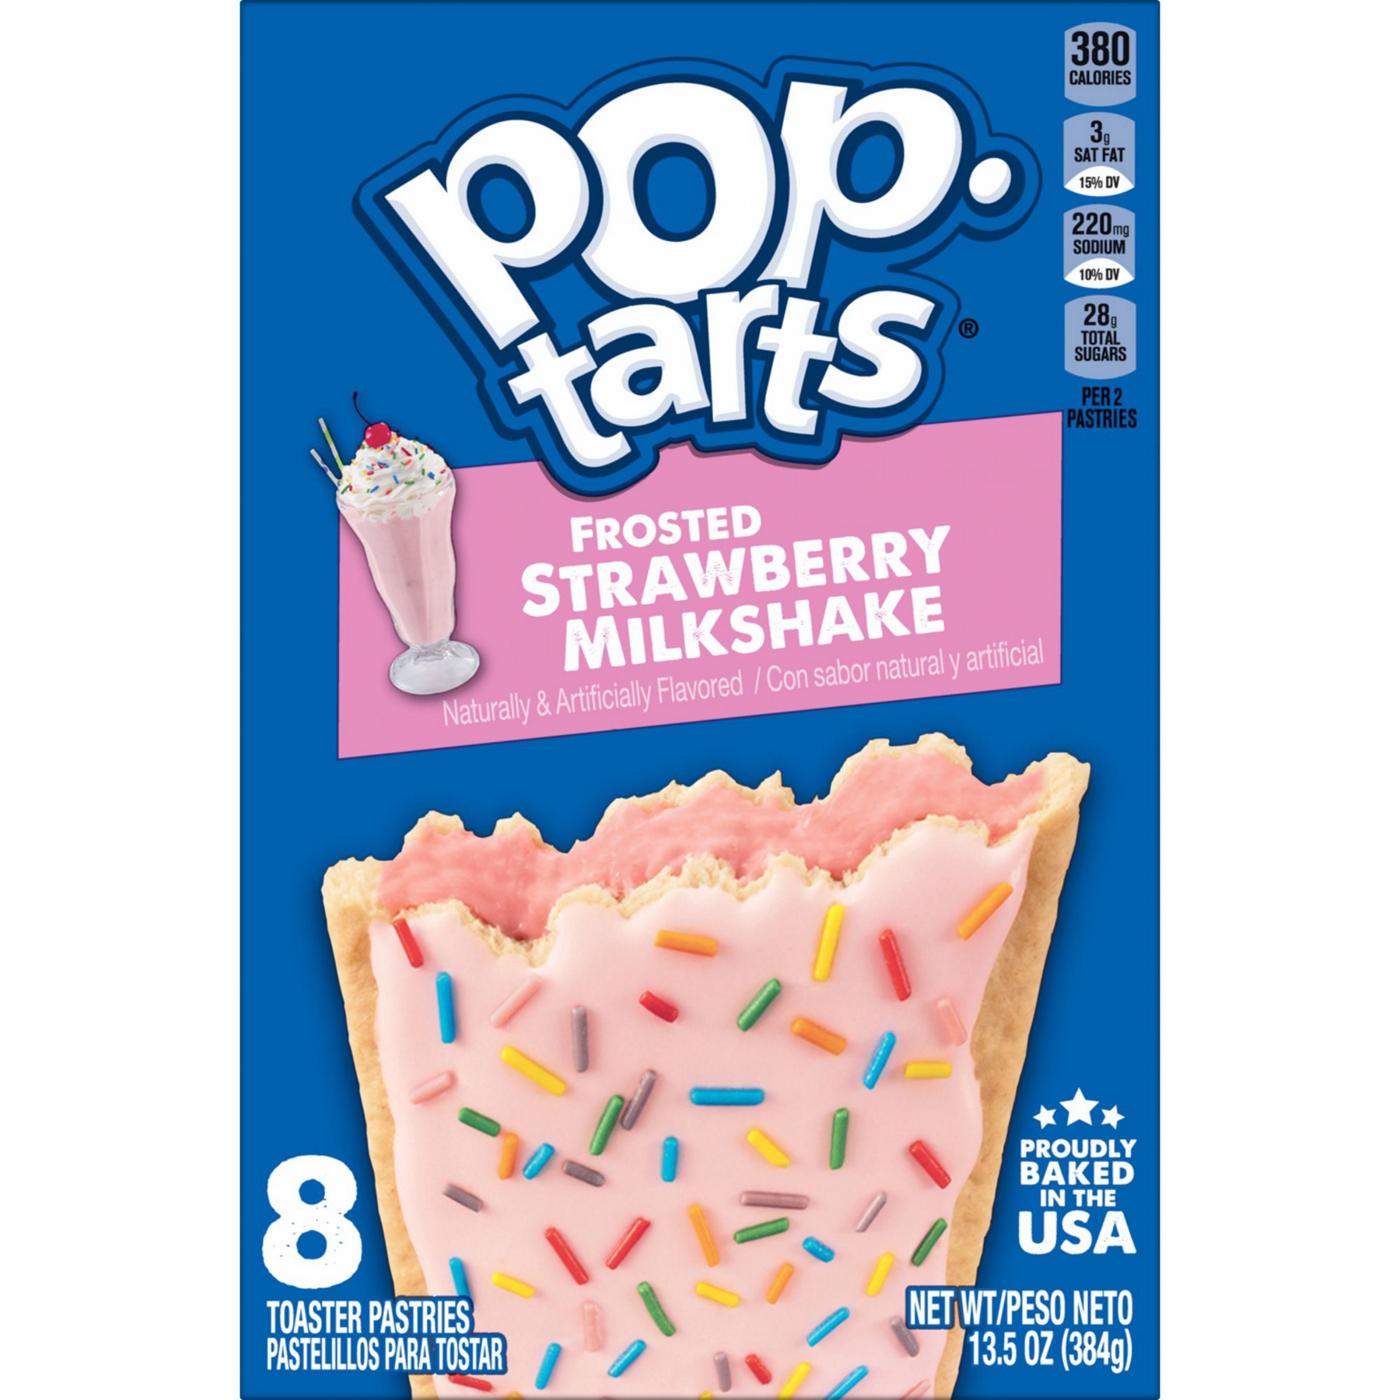 Pop-Tarts Frosted Strawberry Milkshake Toaster Pastries; image 1 of 6